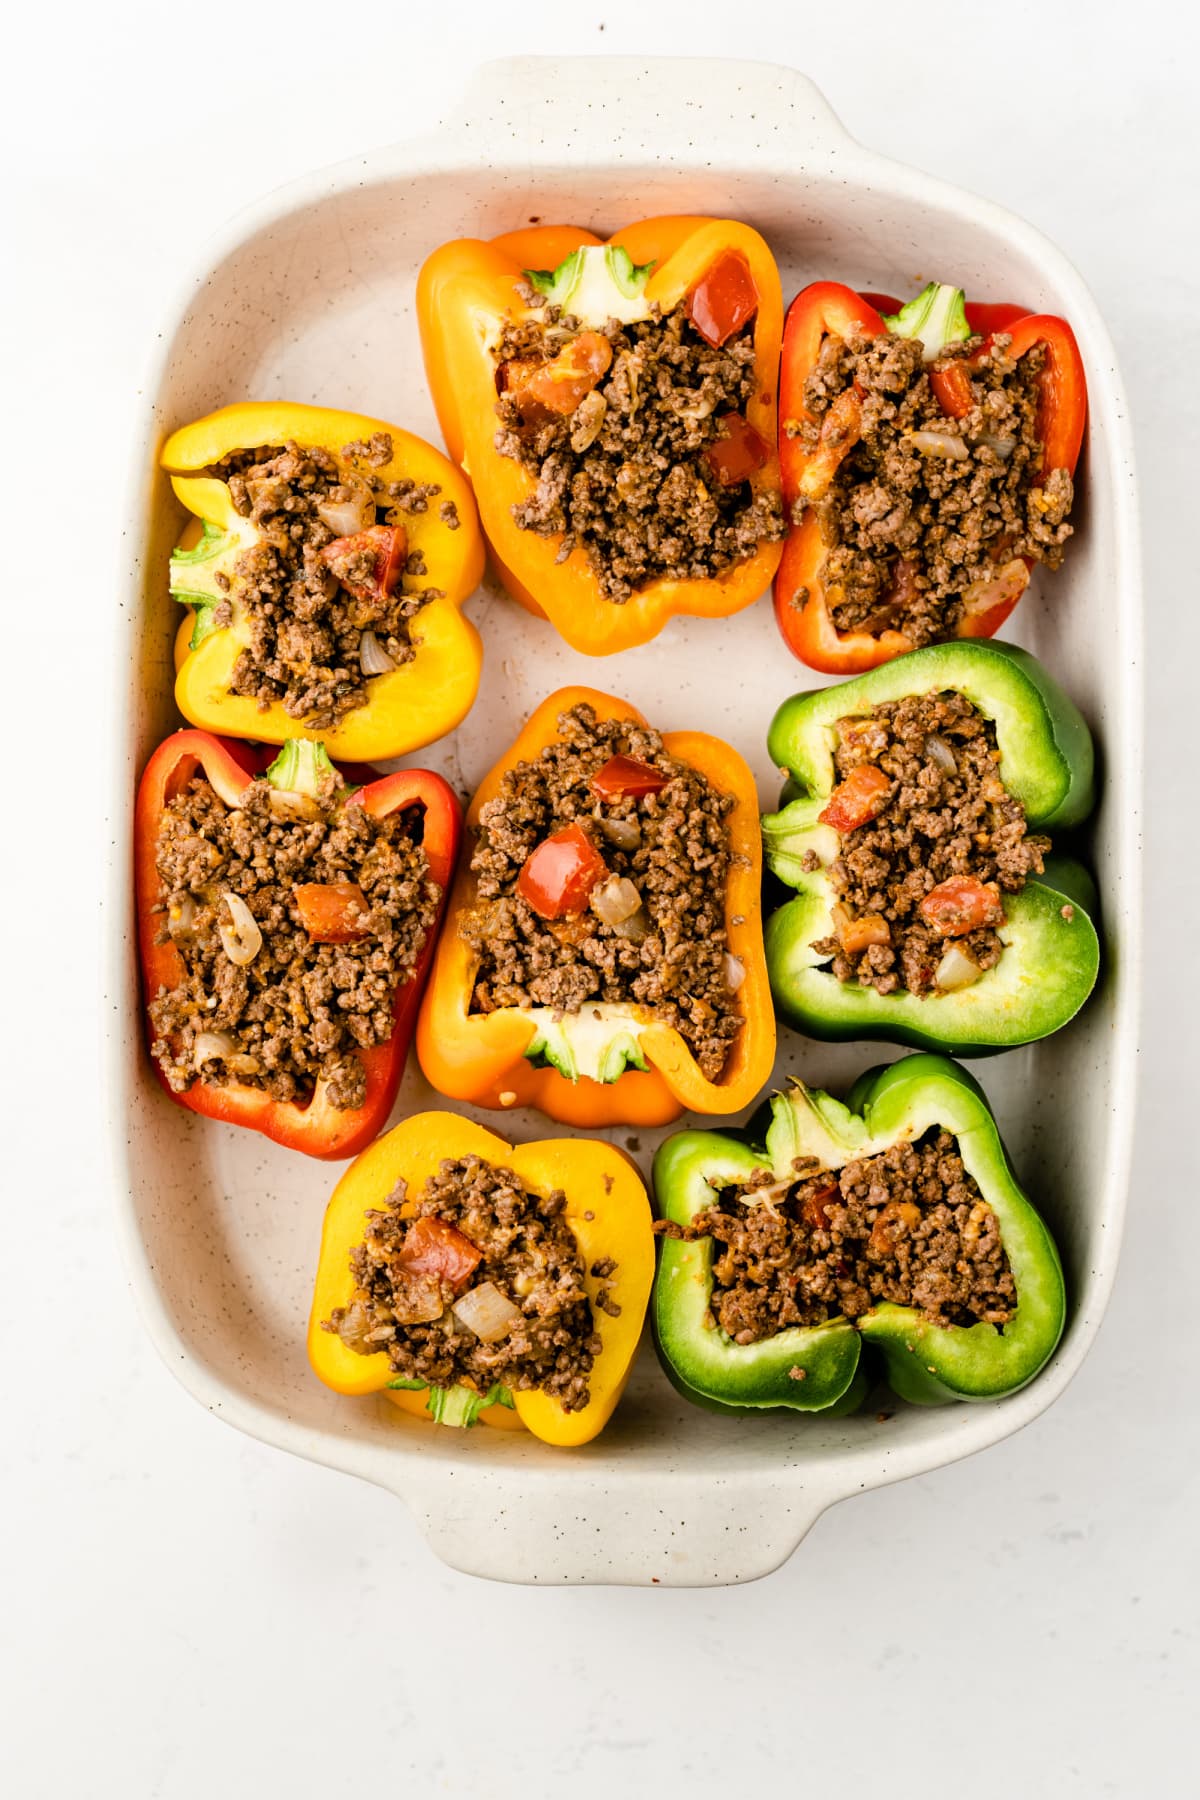 Bell peppers filled with taco meat